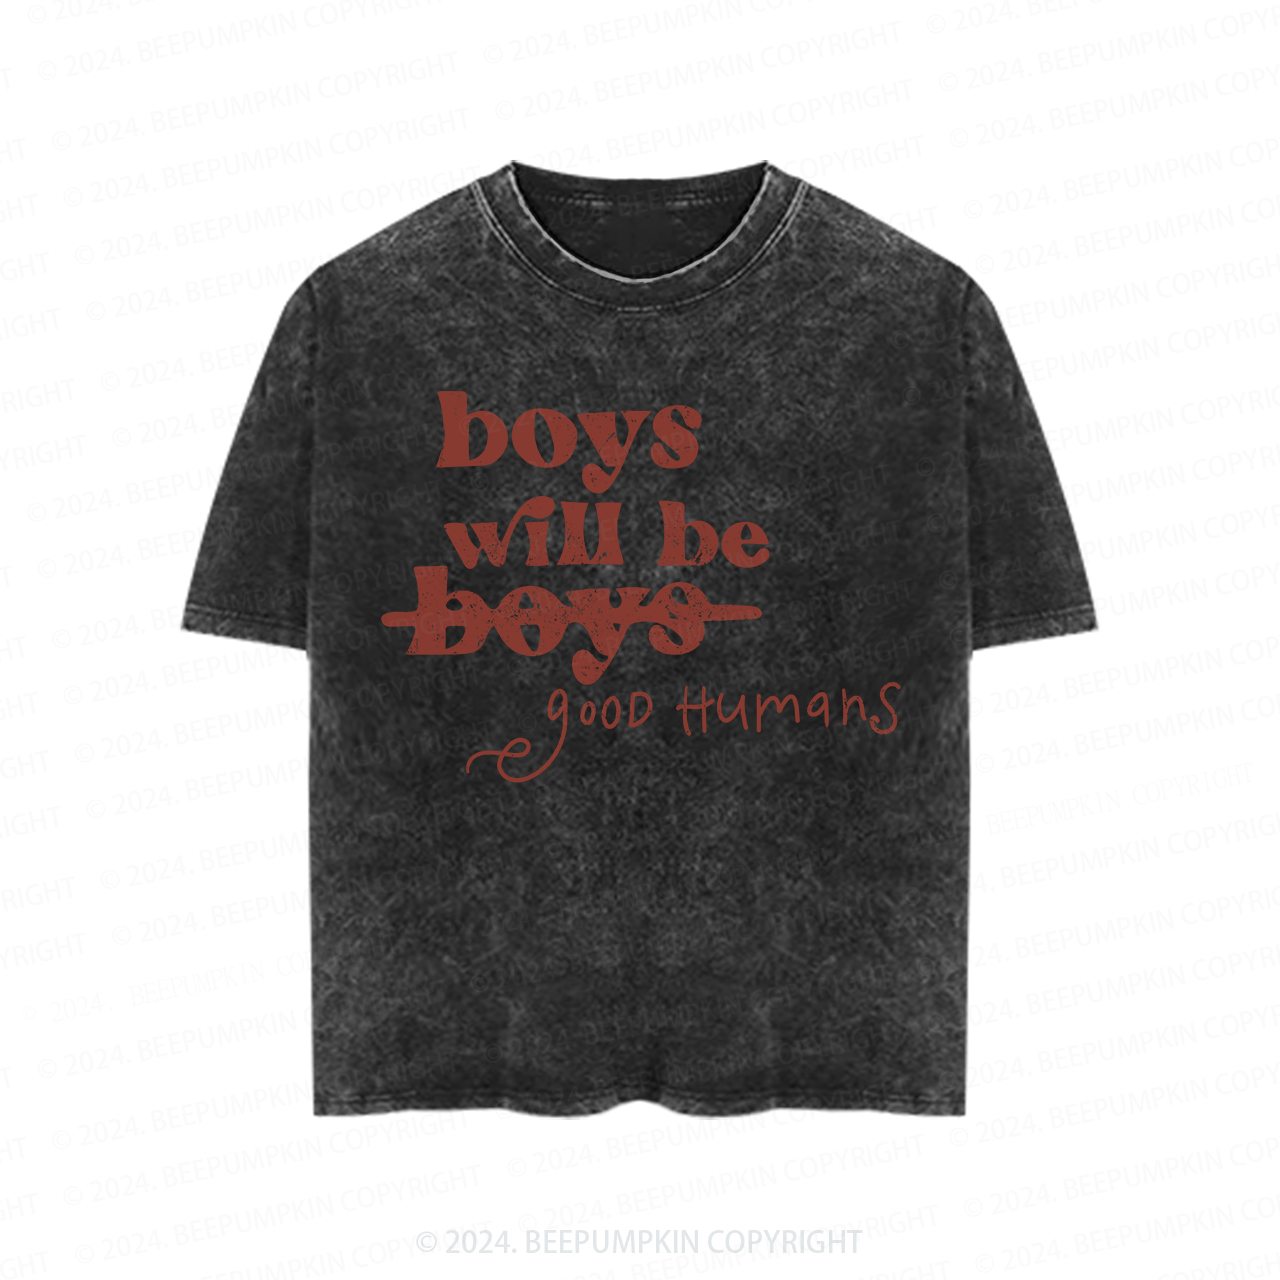 Boys Will Be Boys Good Humans Toddler&Kids Washed Tees      